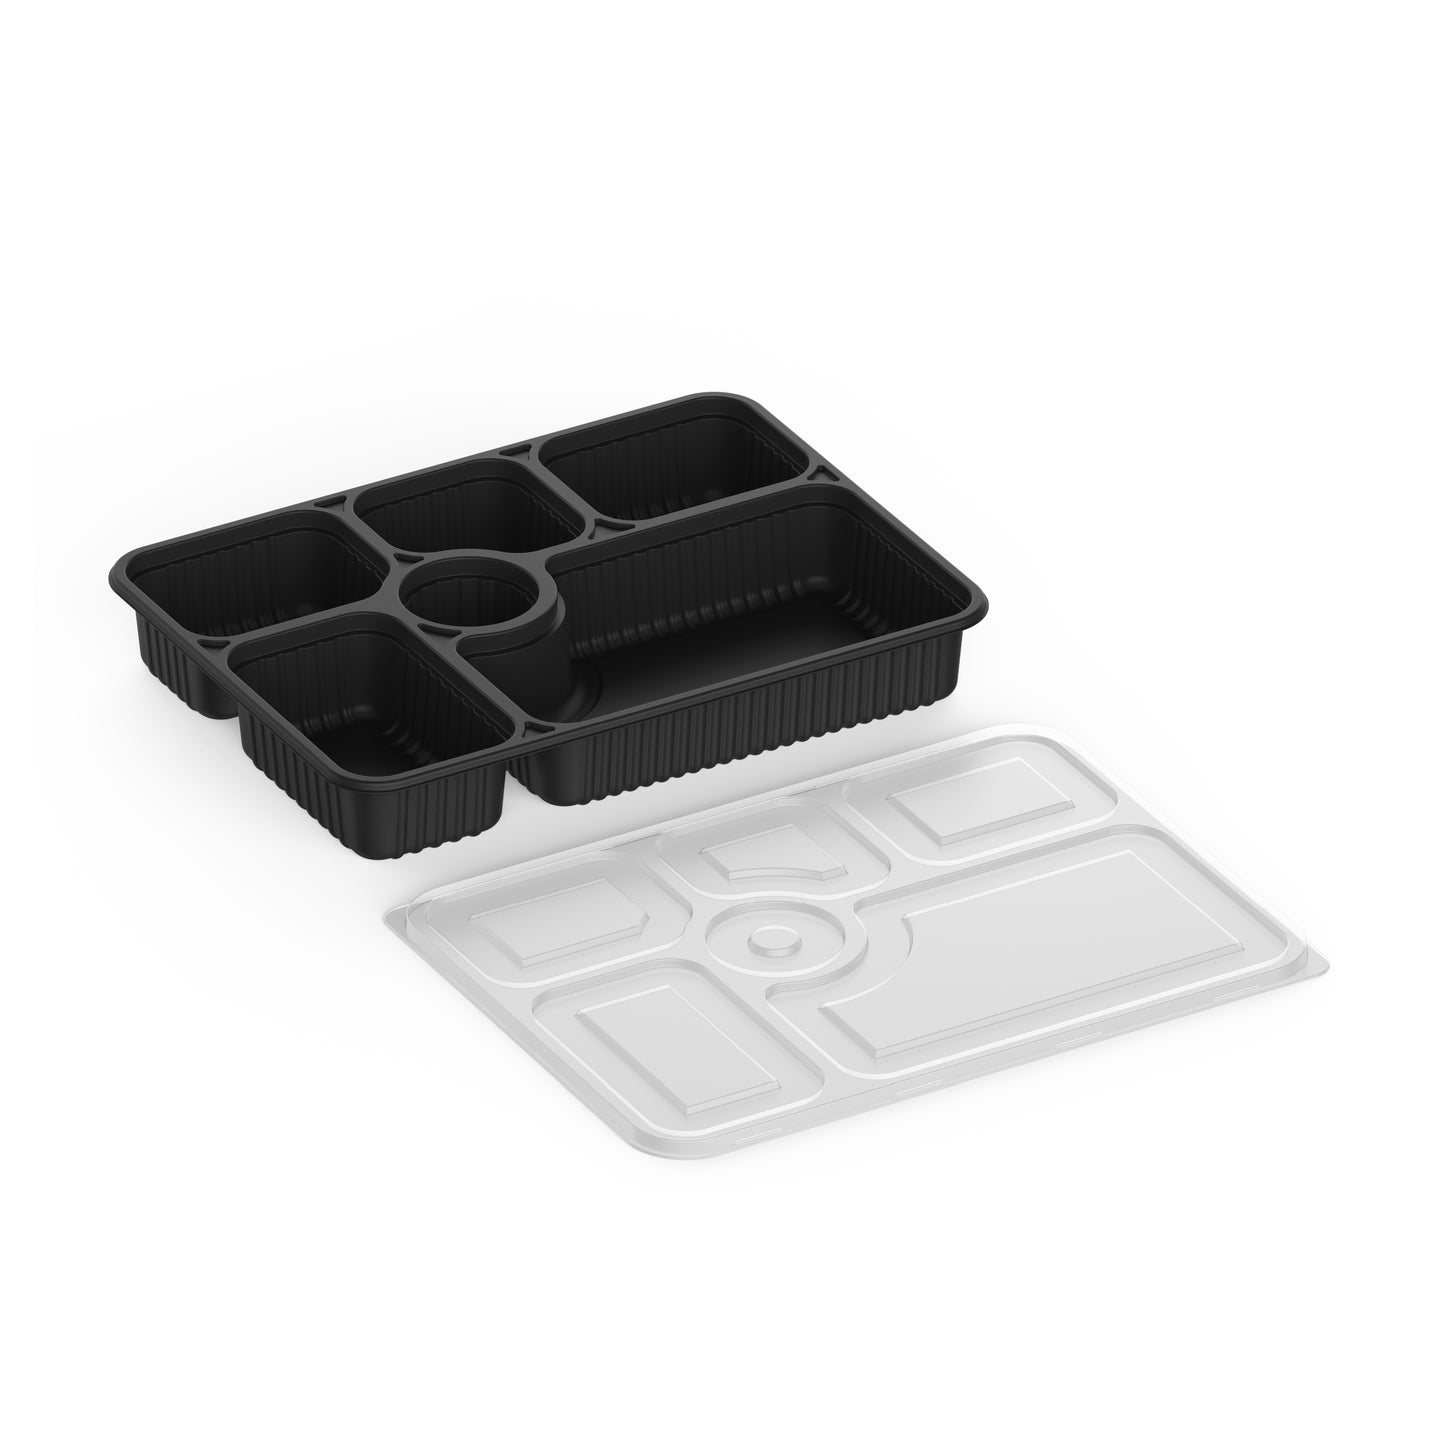 6 Compartments Pack of 10 Black Meal Containers with Clear Lids